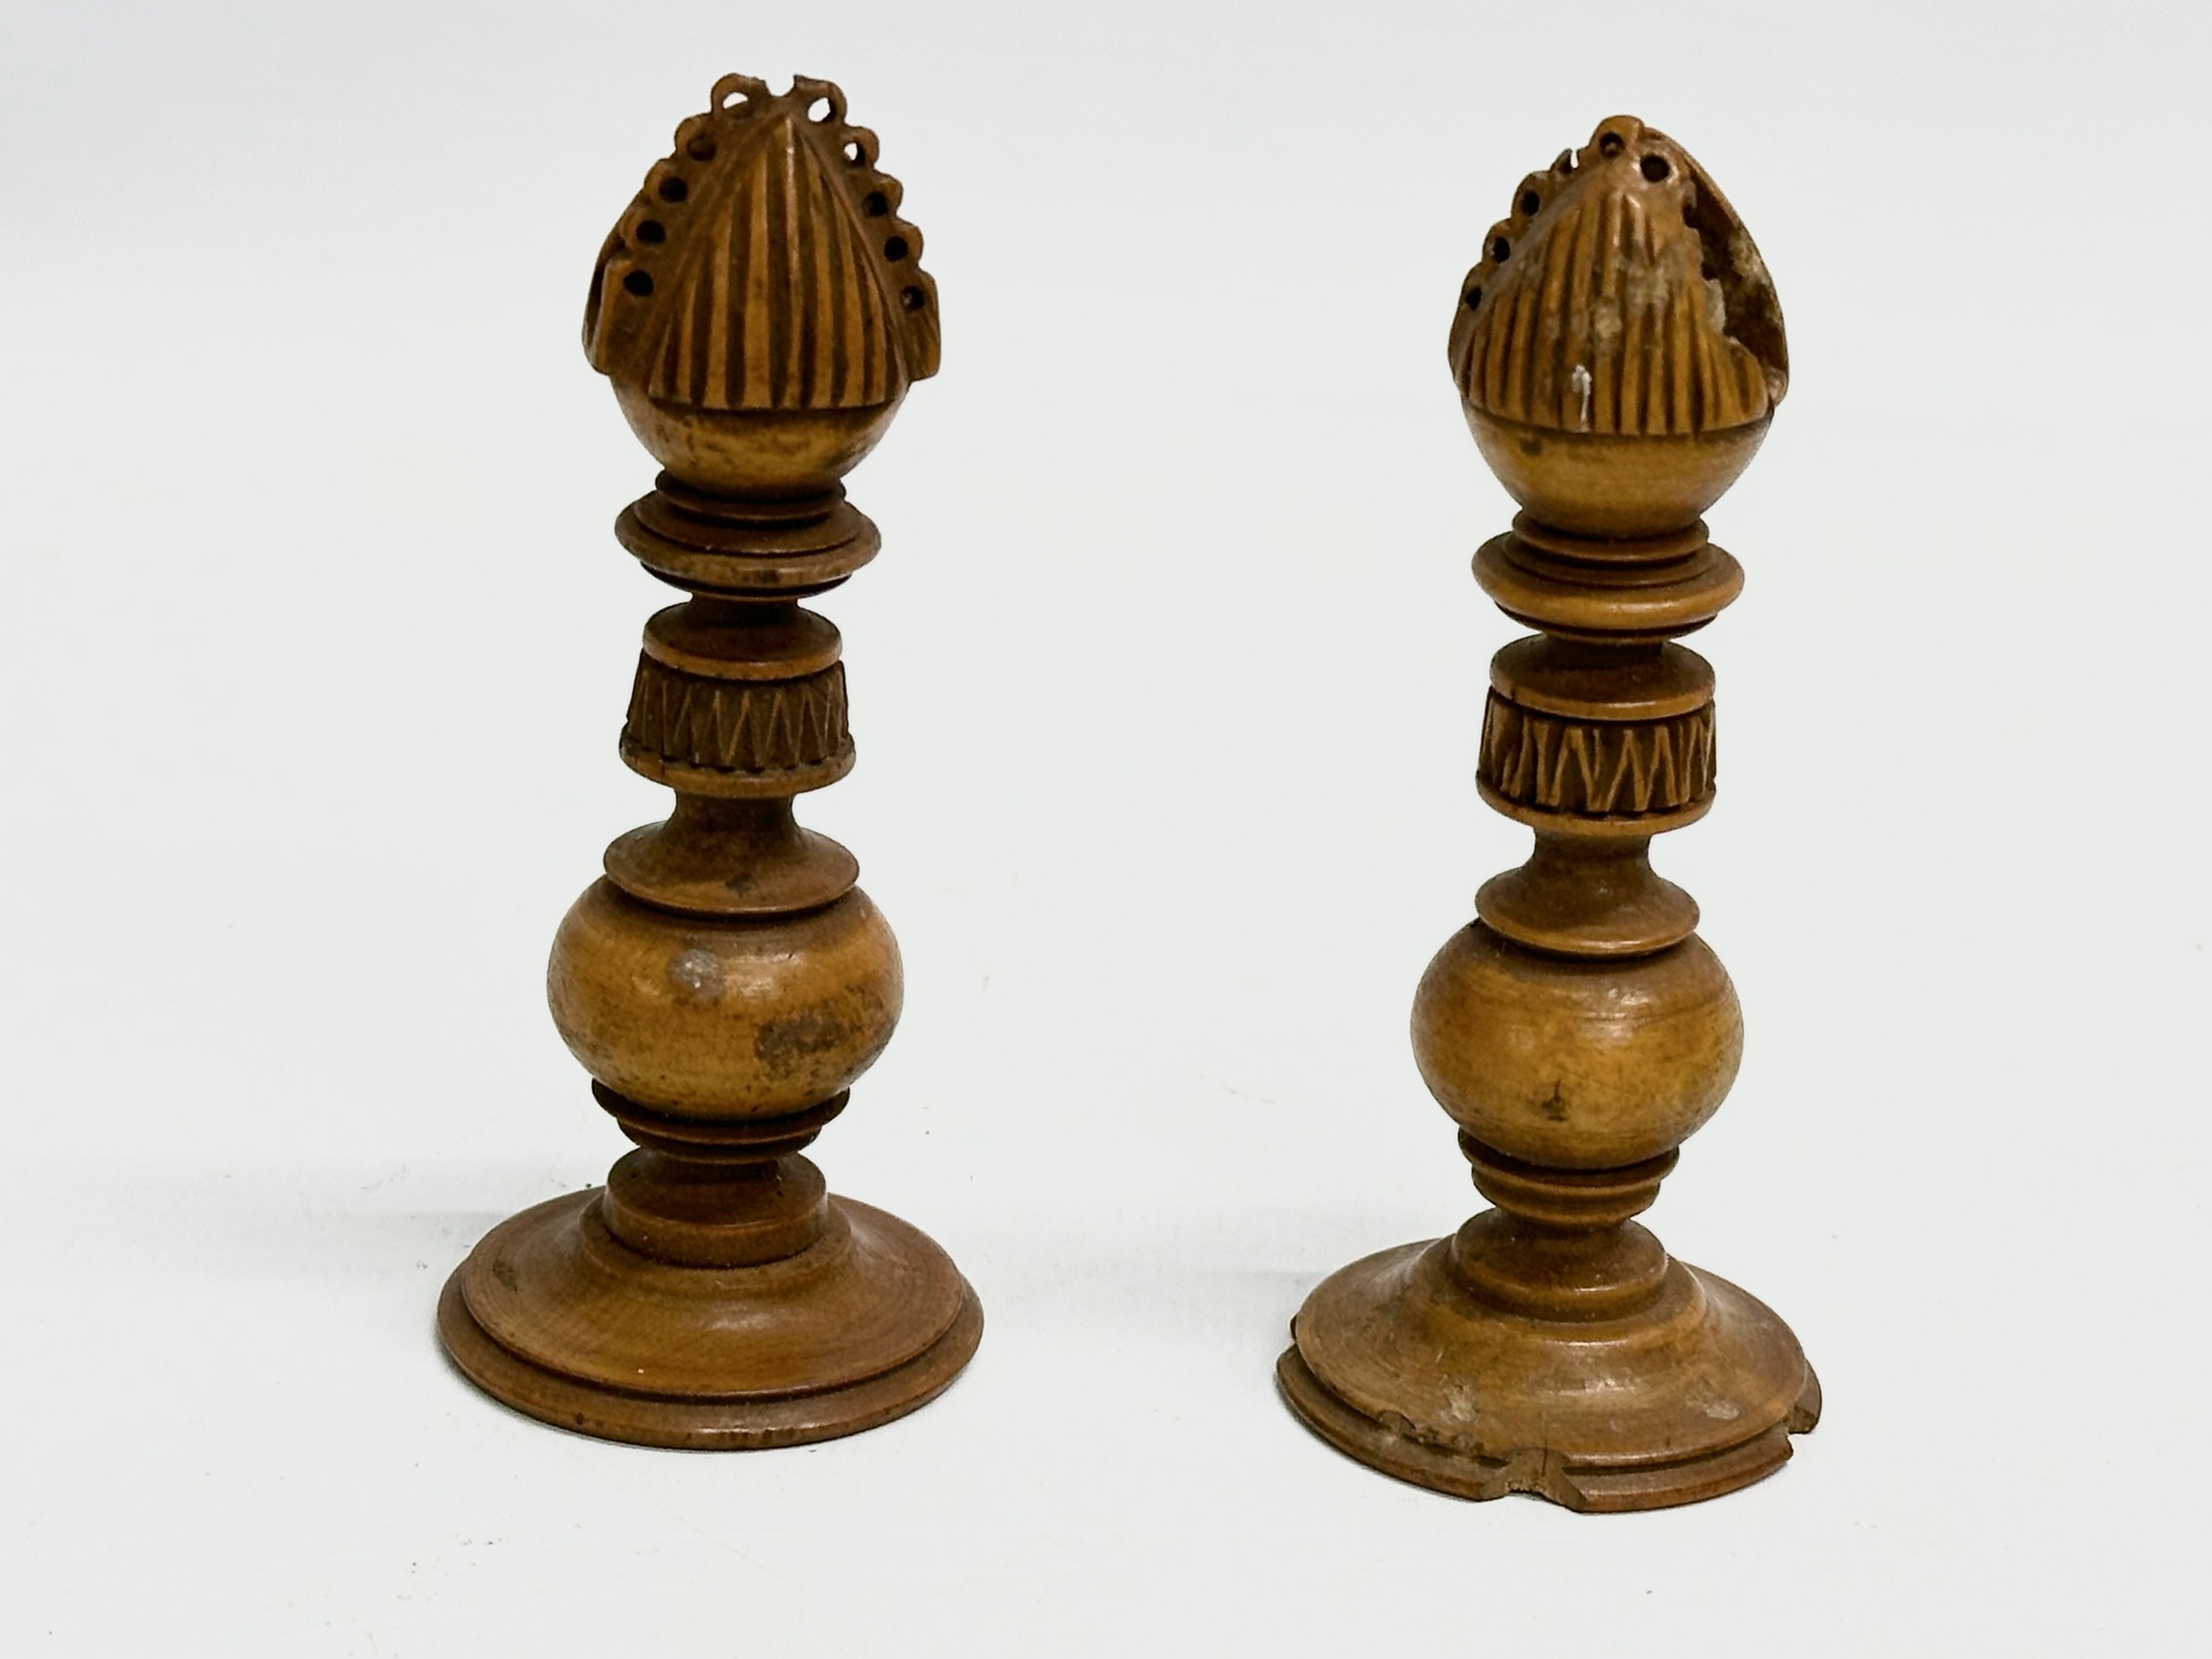 Good quality 19th Century chess pieces in the style of the Holy Land Crusade, Islamic vs Christian - Image 15 of 17